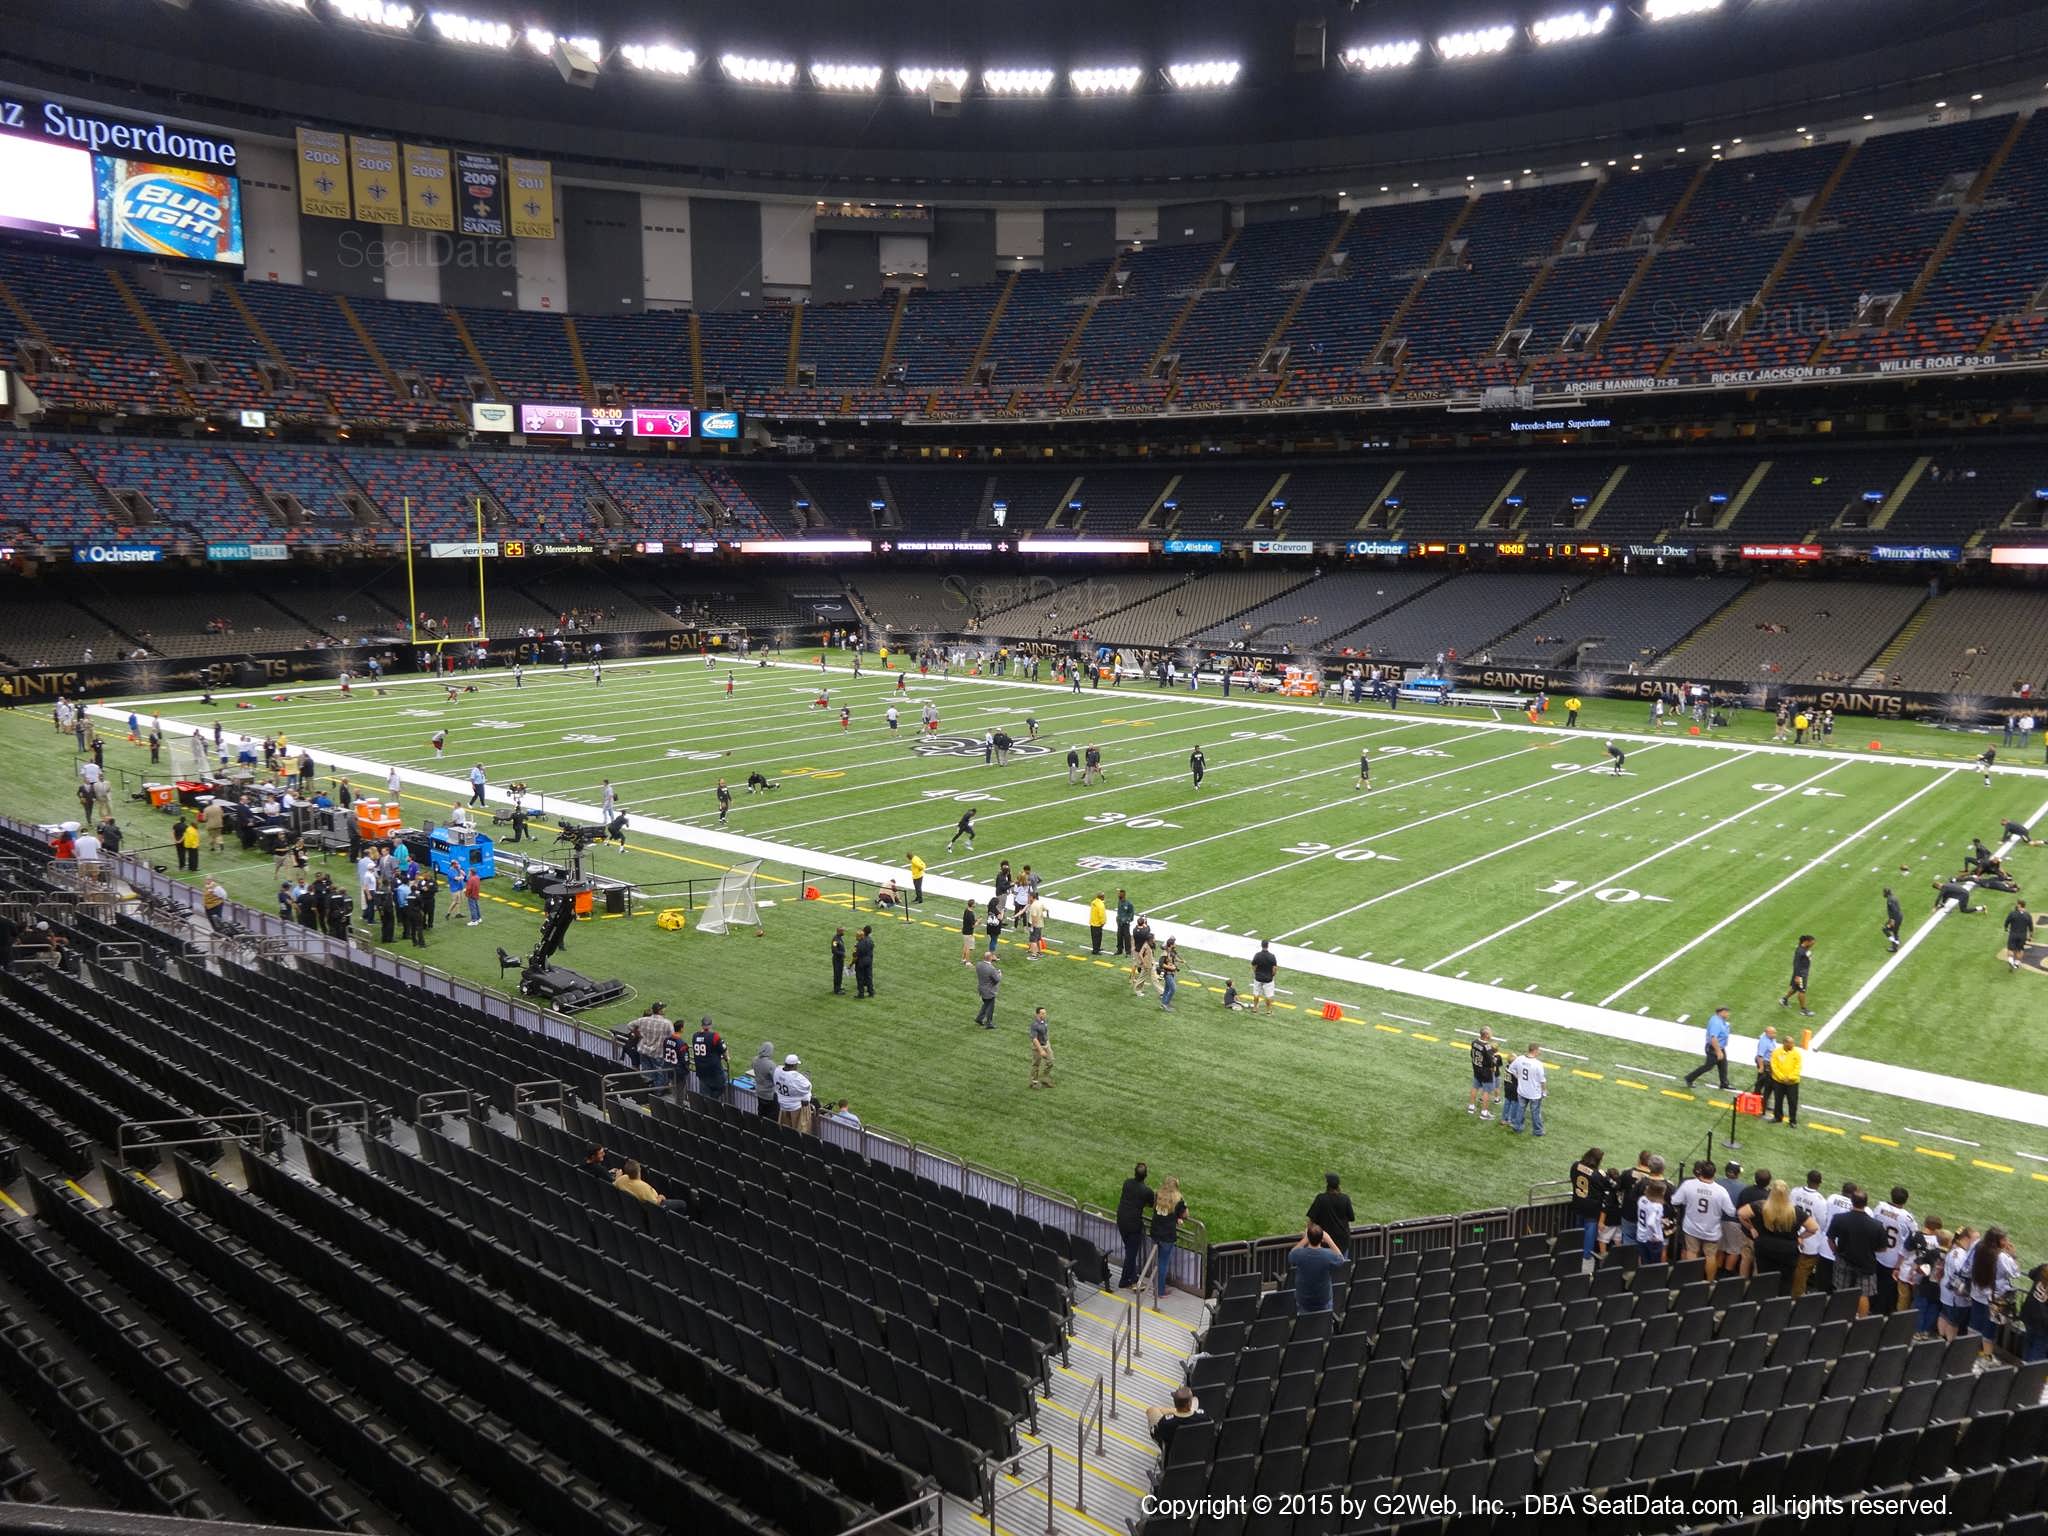 Seat view from section 254 at the Mercedes-Benz Superdome, home of the New Orleans Saints